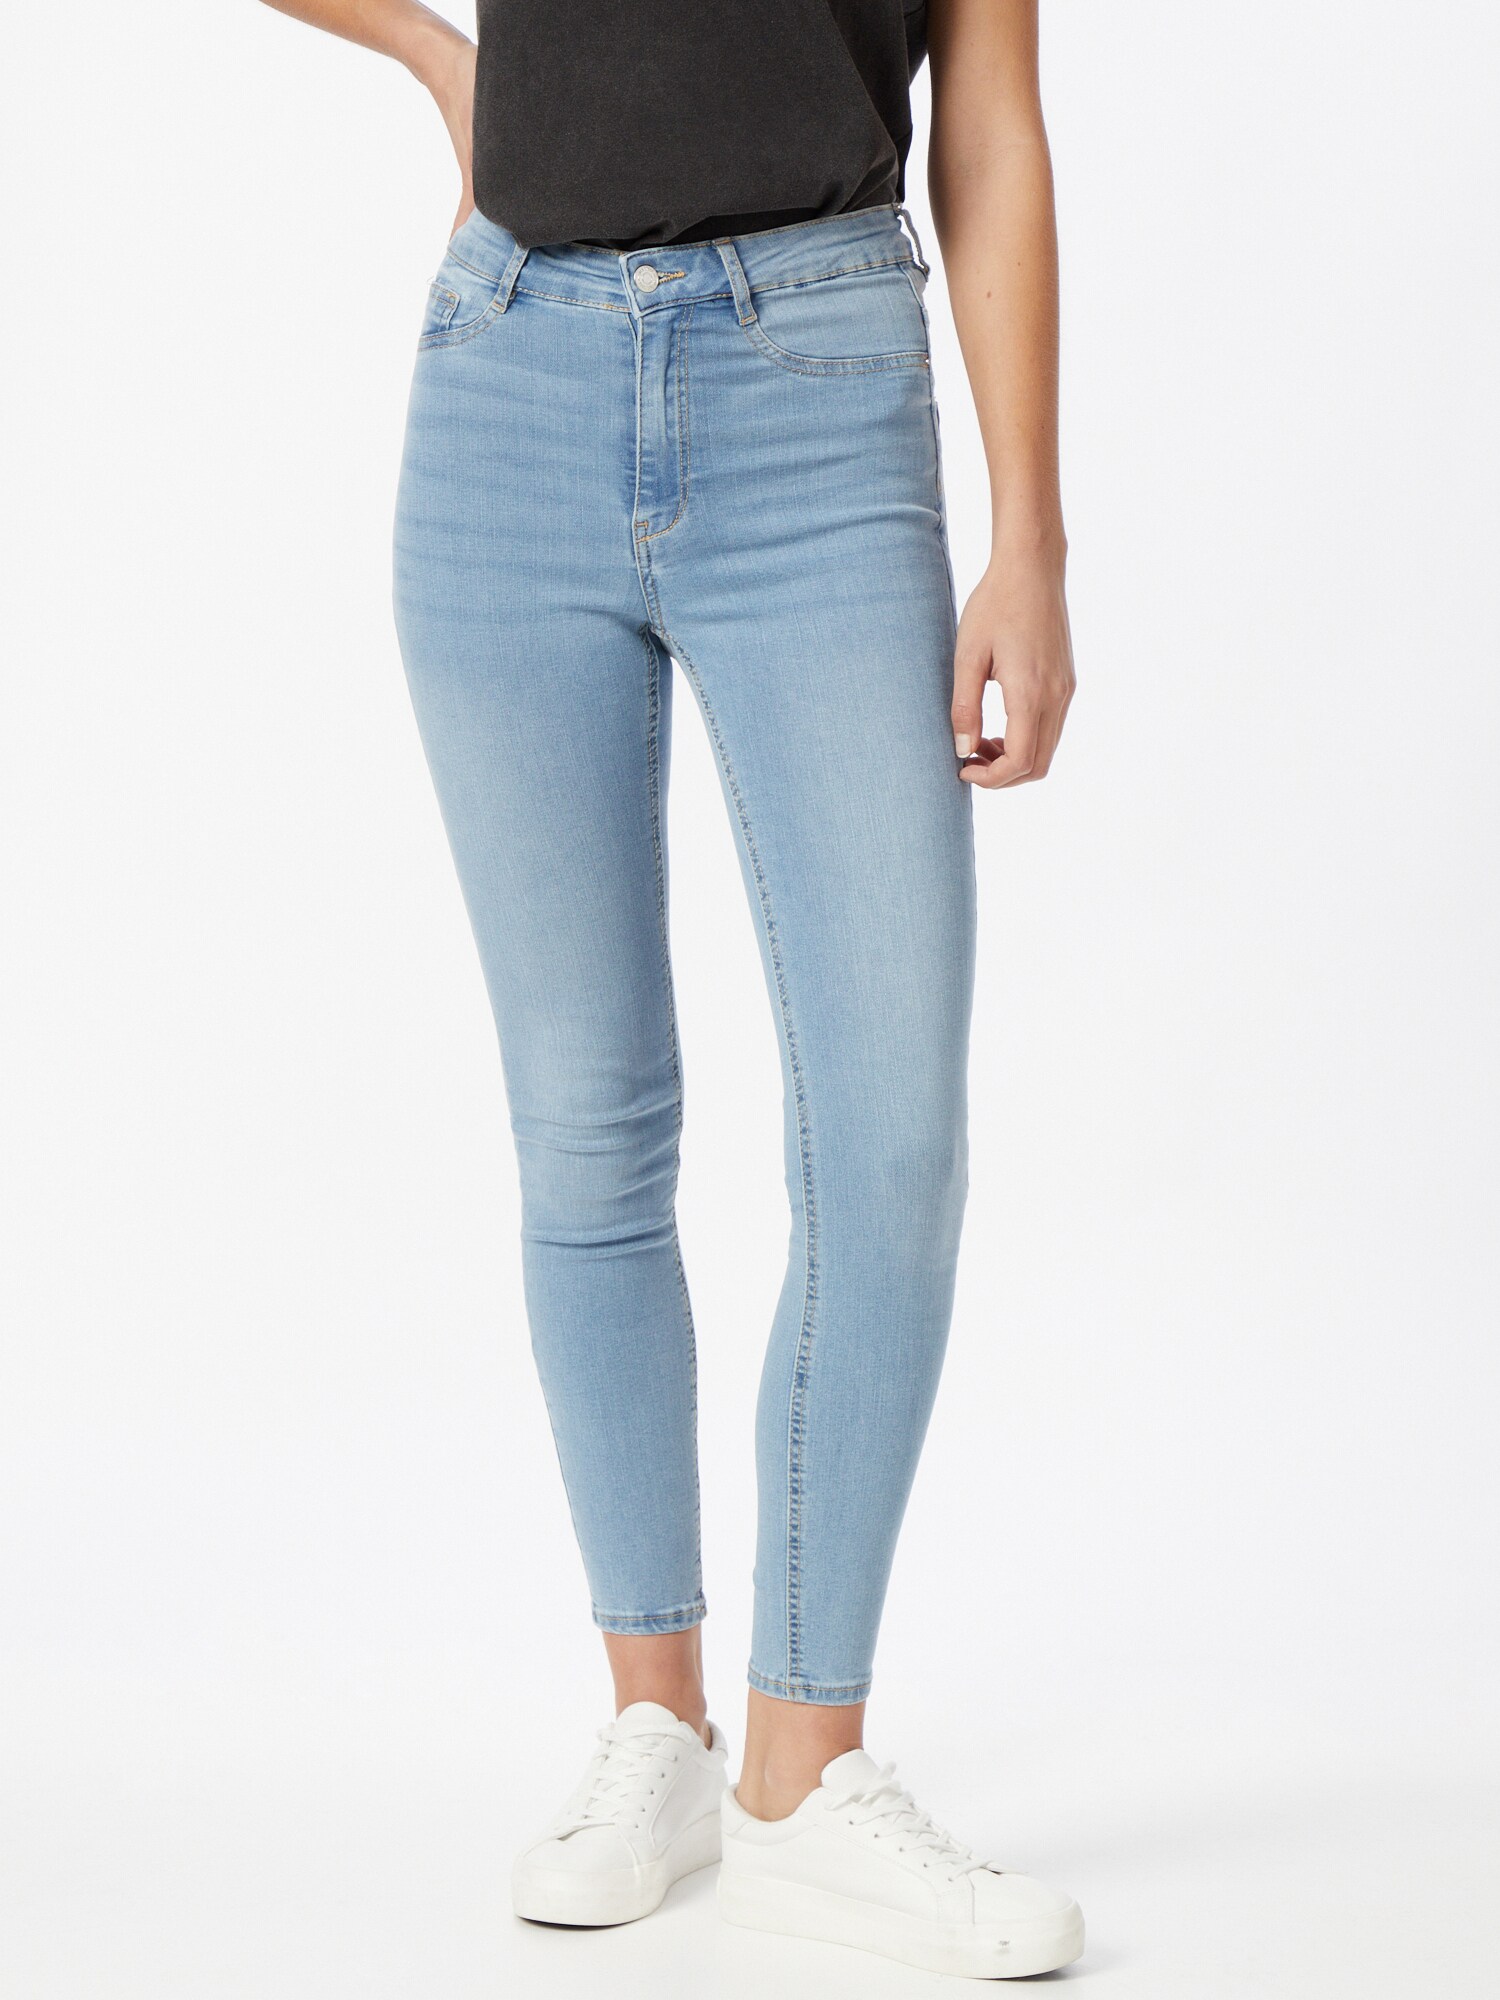 Gina Tricot Jeans 'Molly'  light blue